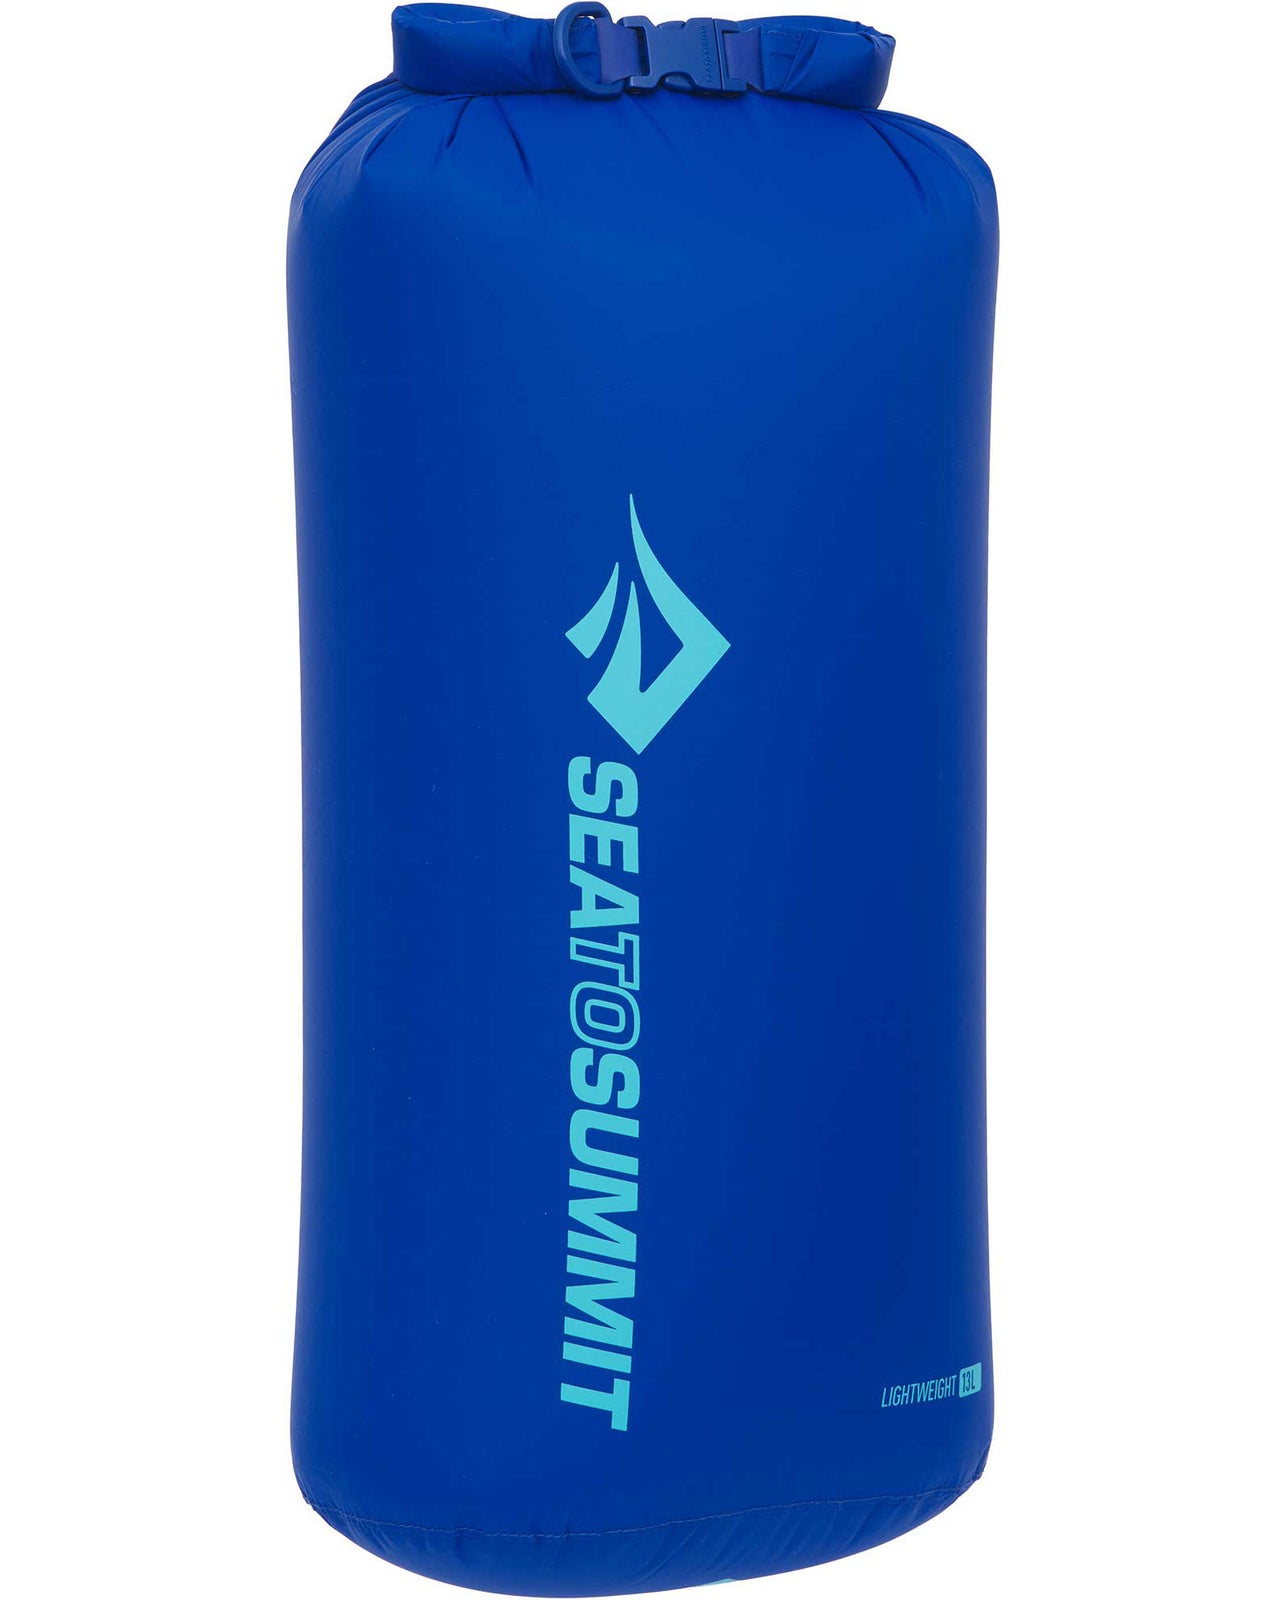 Sea to Summit Lightweight Dry Bag 13L Dry Bags 0